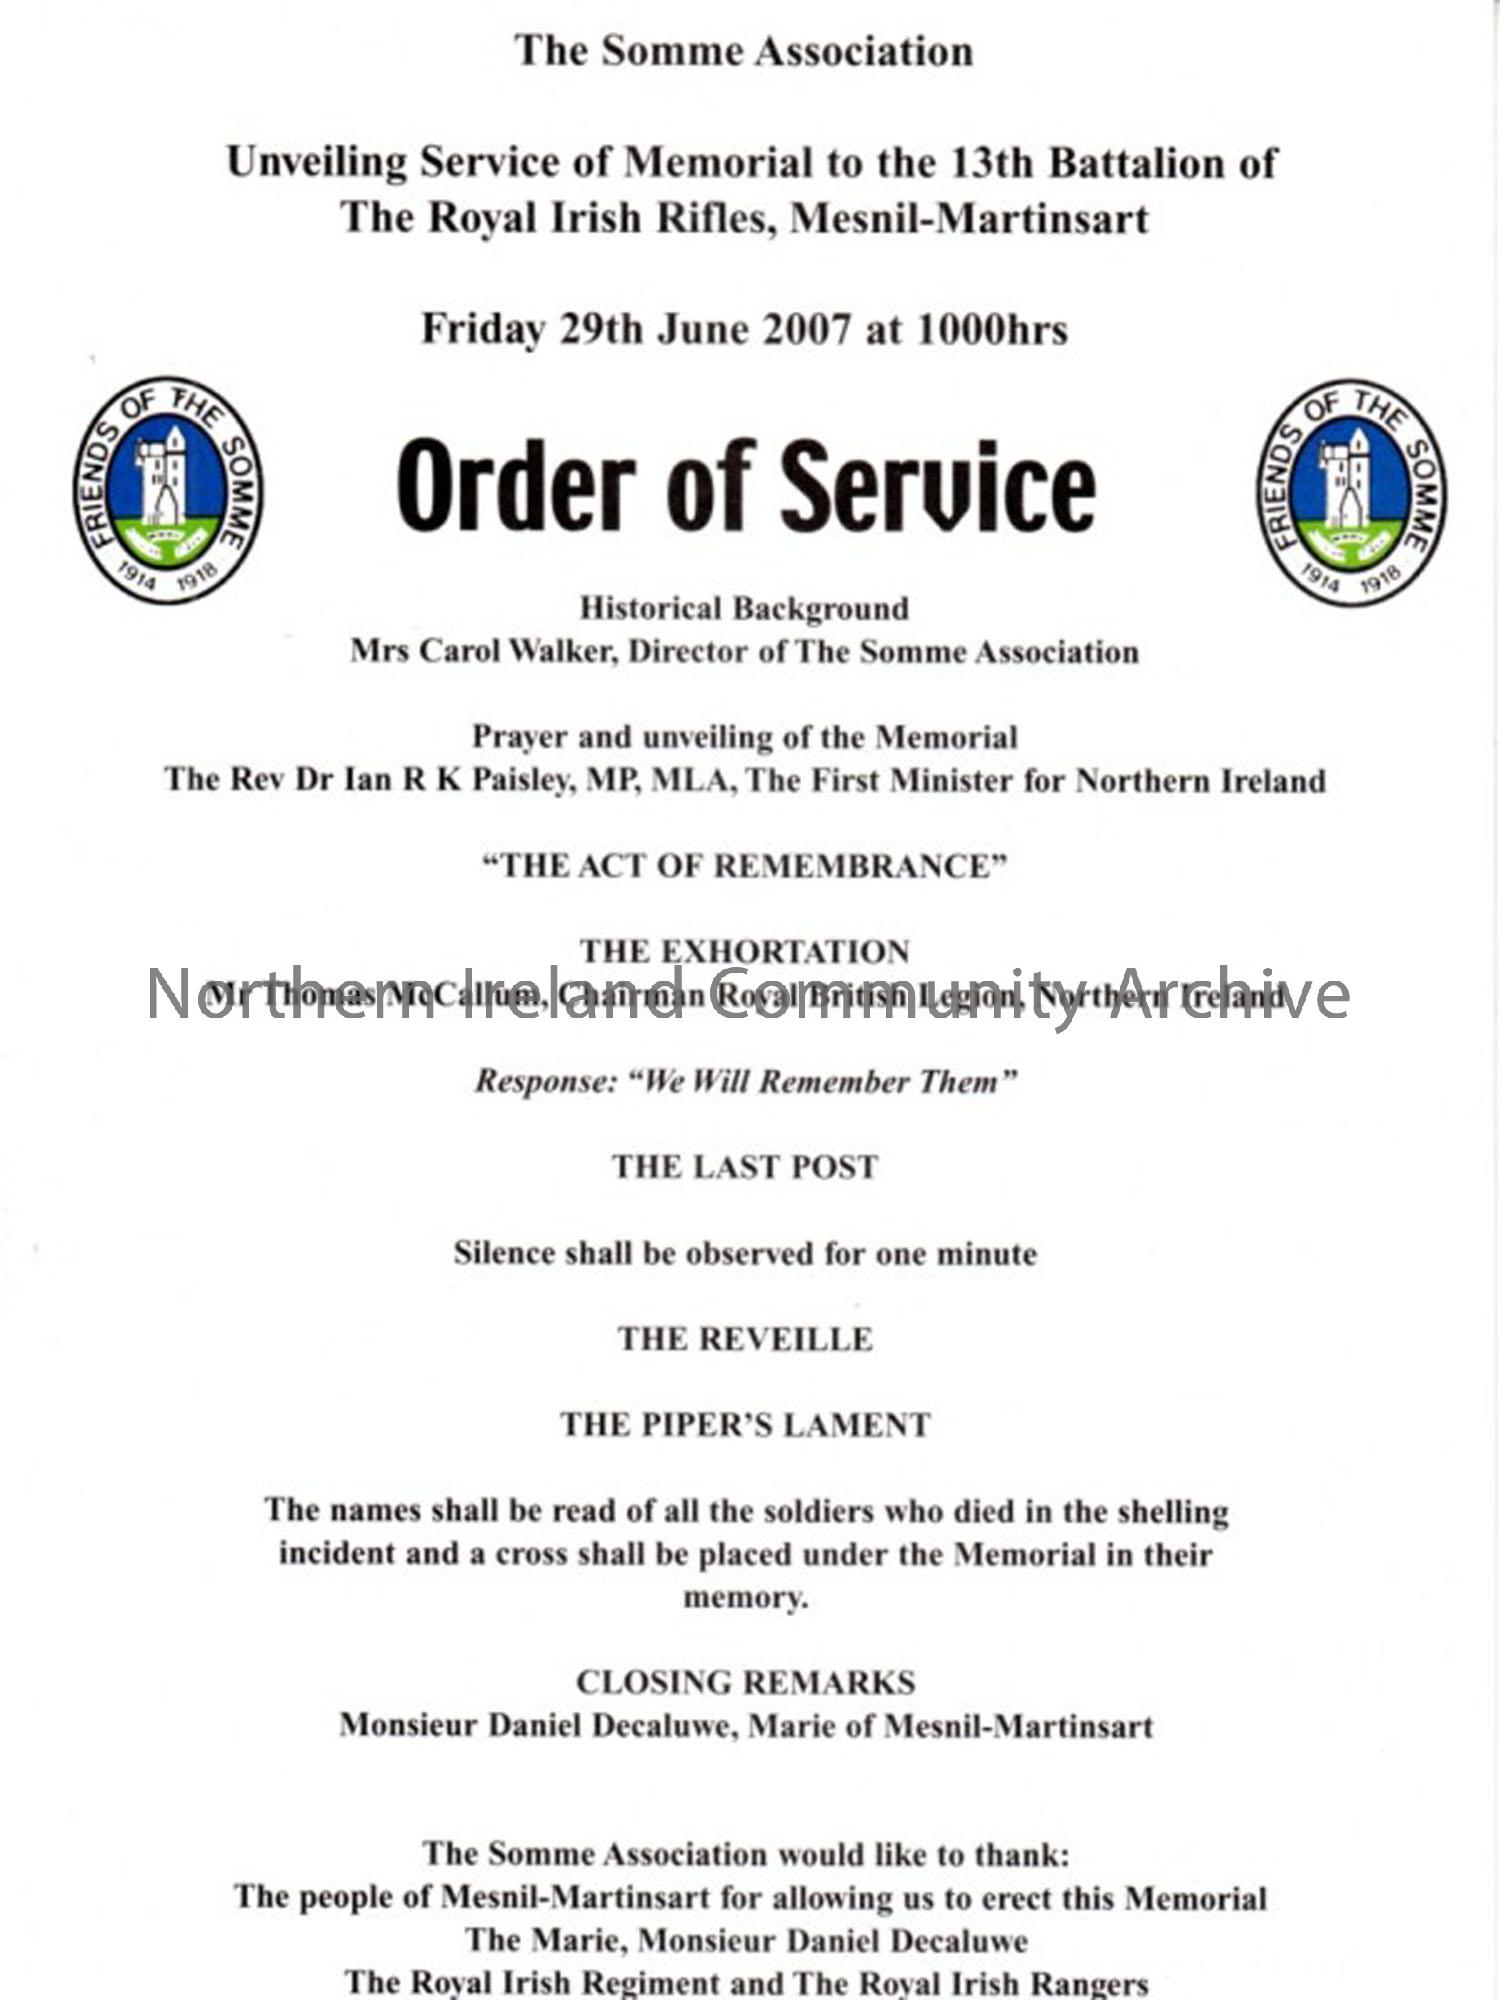 The Somme Association unveiling service of Memorial to the 13th Battalion of the Royal Irish Rifles, Mesnil-Martinsart, Friday 29th June 2007 at 1000h…